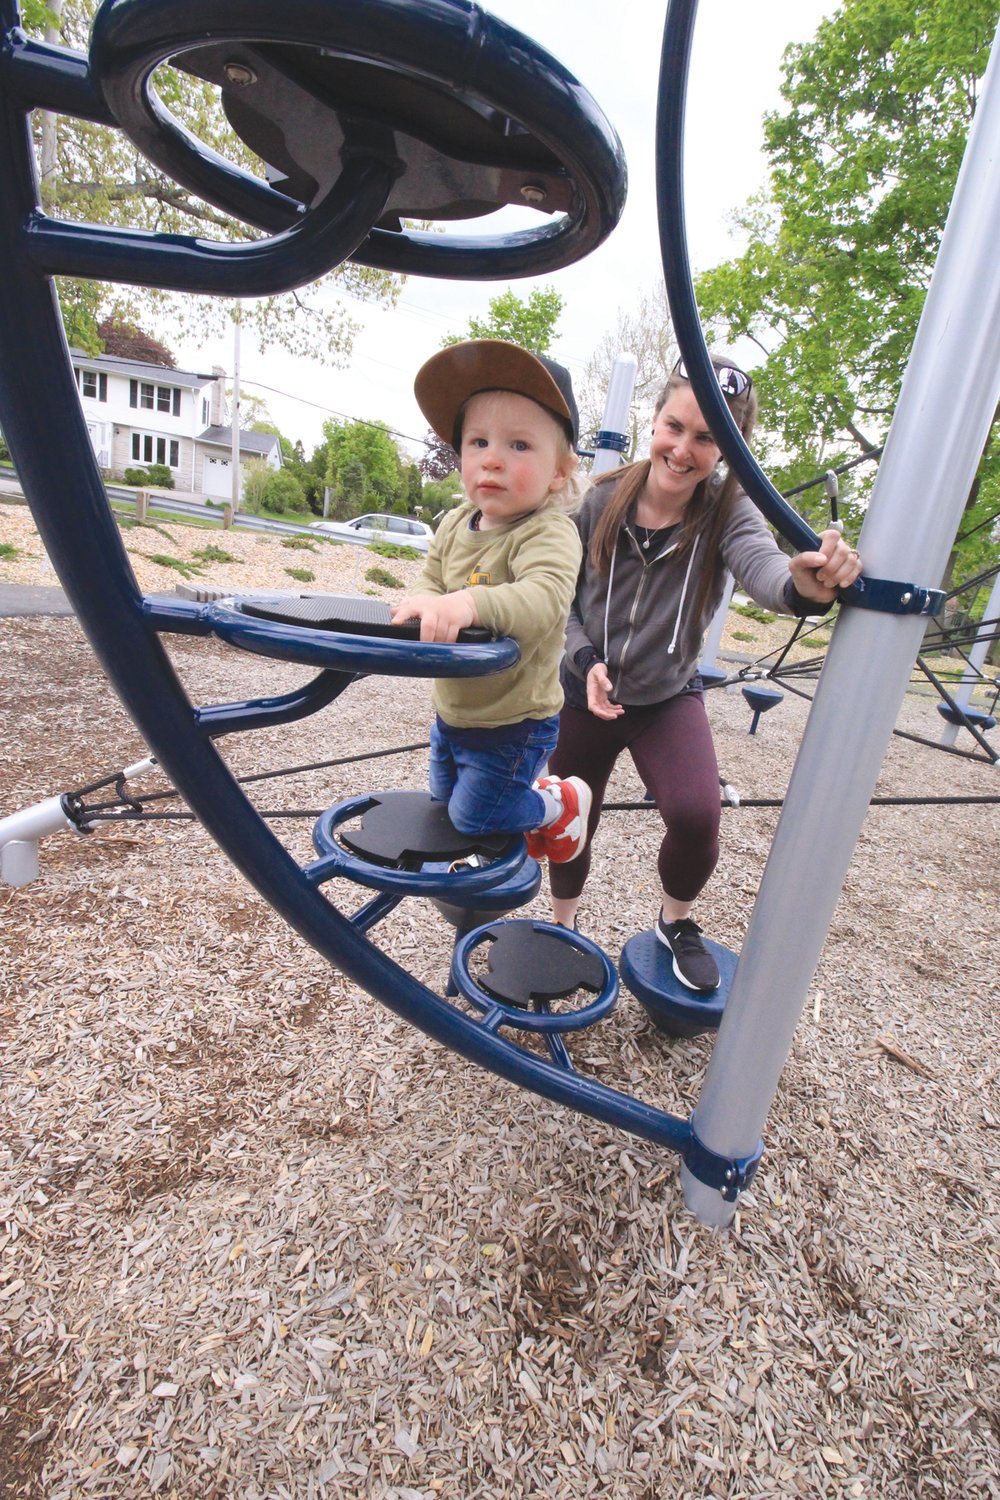 NEW HEIGHTS AT SALTER GROVE: Even at one and a half years old Lawson Sweet took to the slide in the park playground. He was intent on getting to the summit with the assistance of his mother Meghan who insisted on taking the ride down with him.